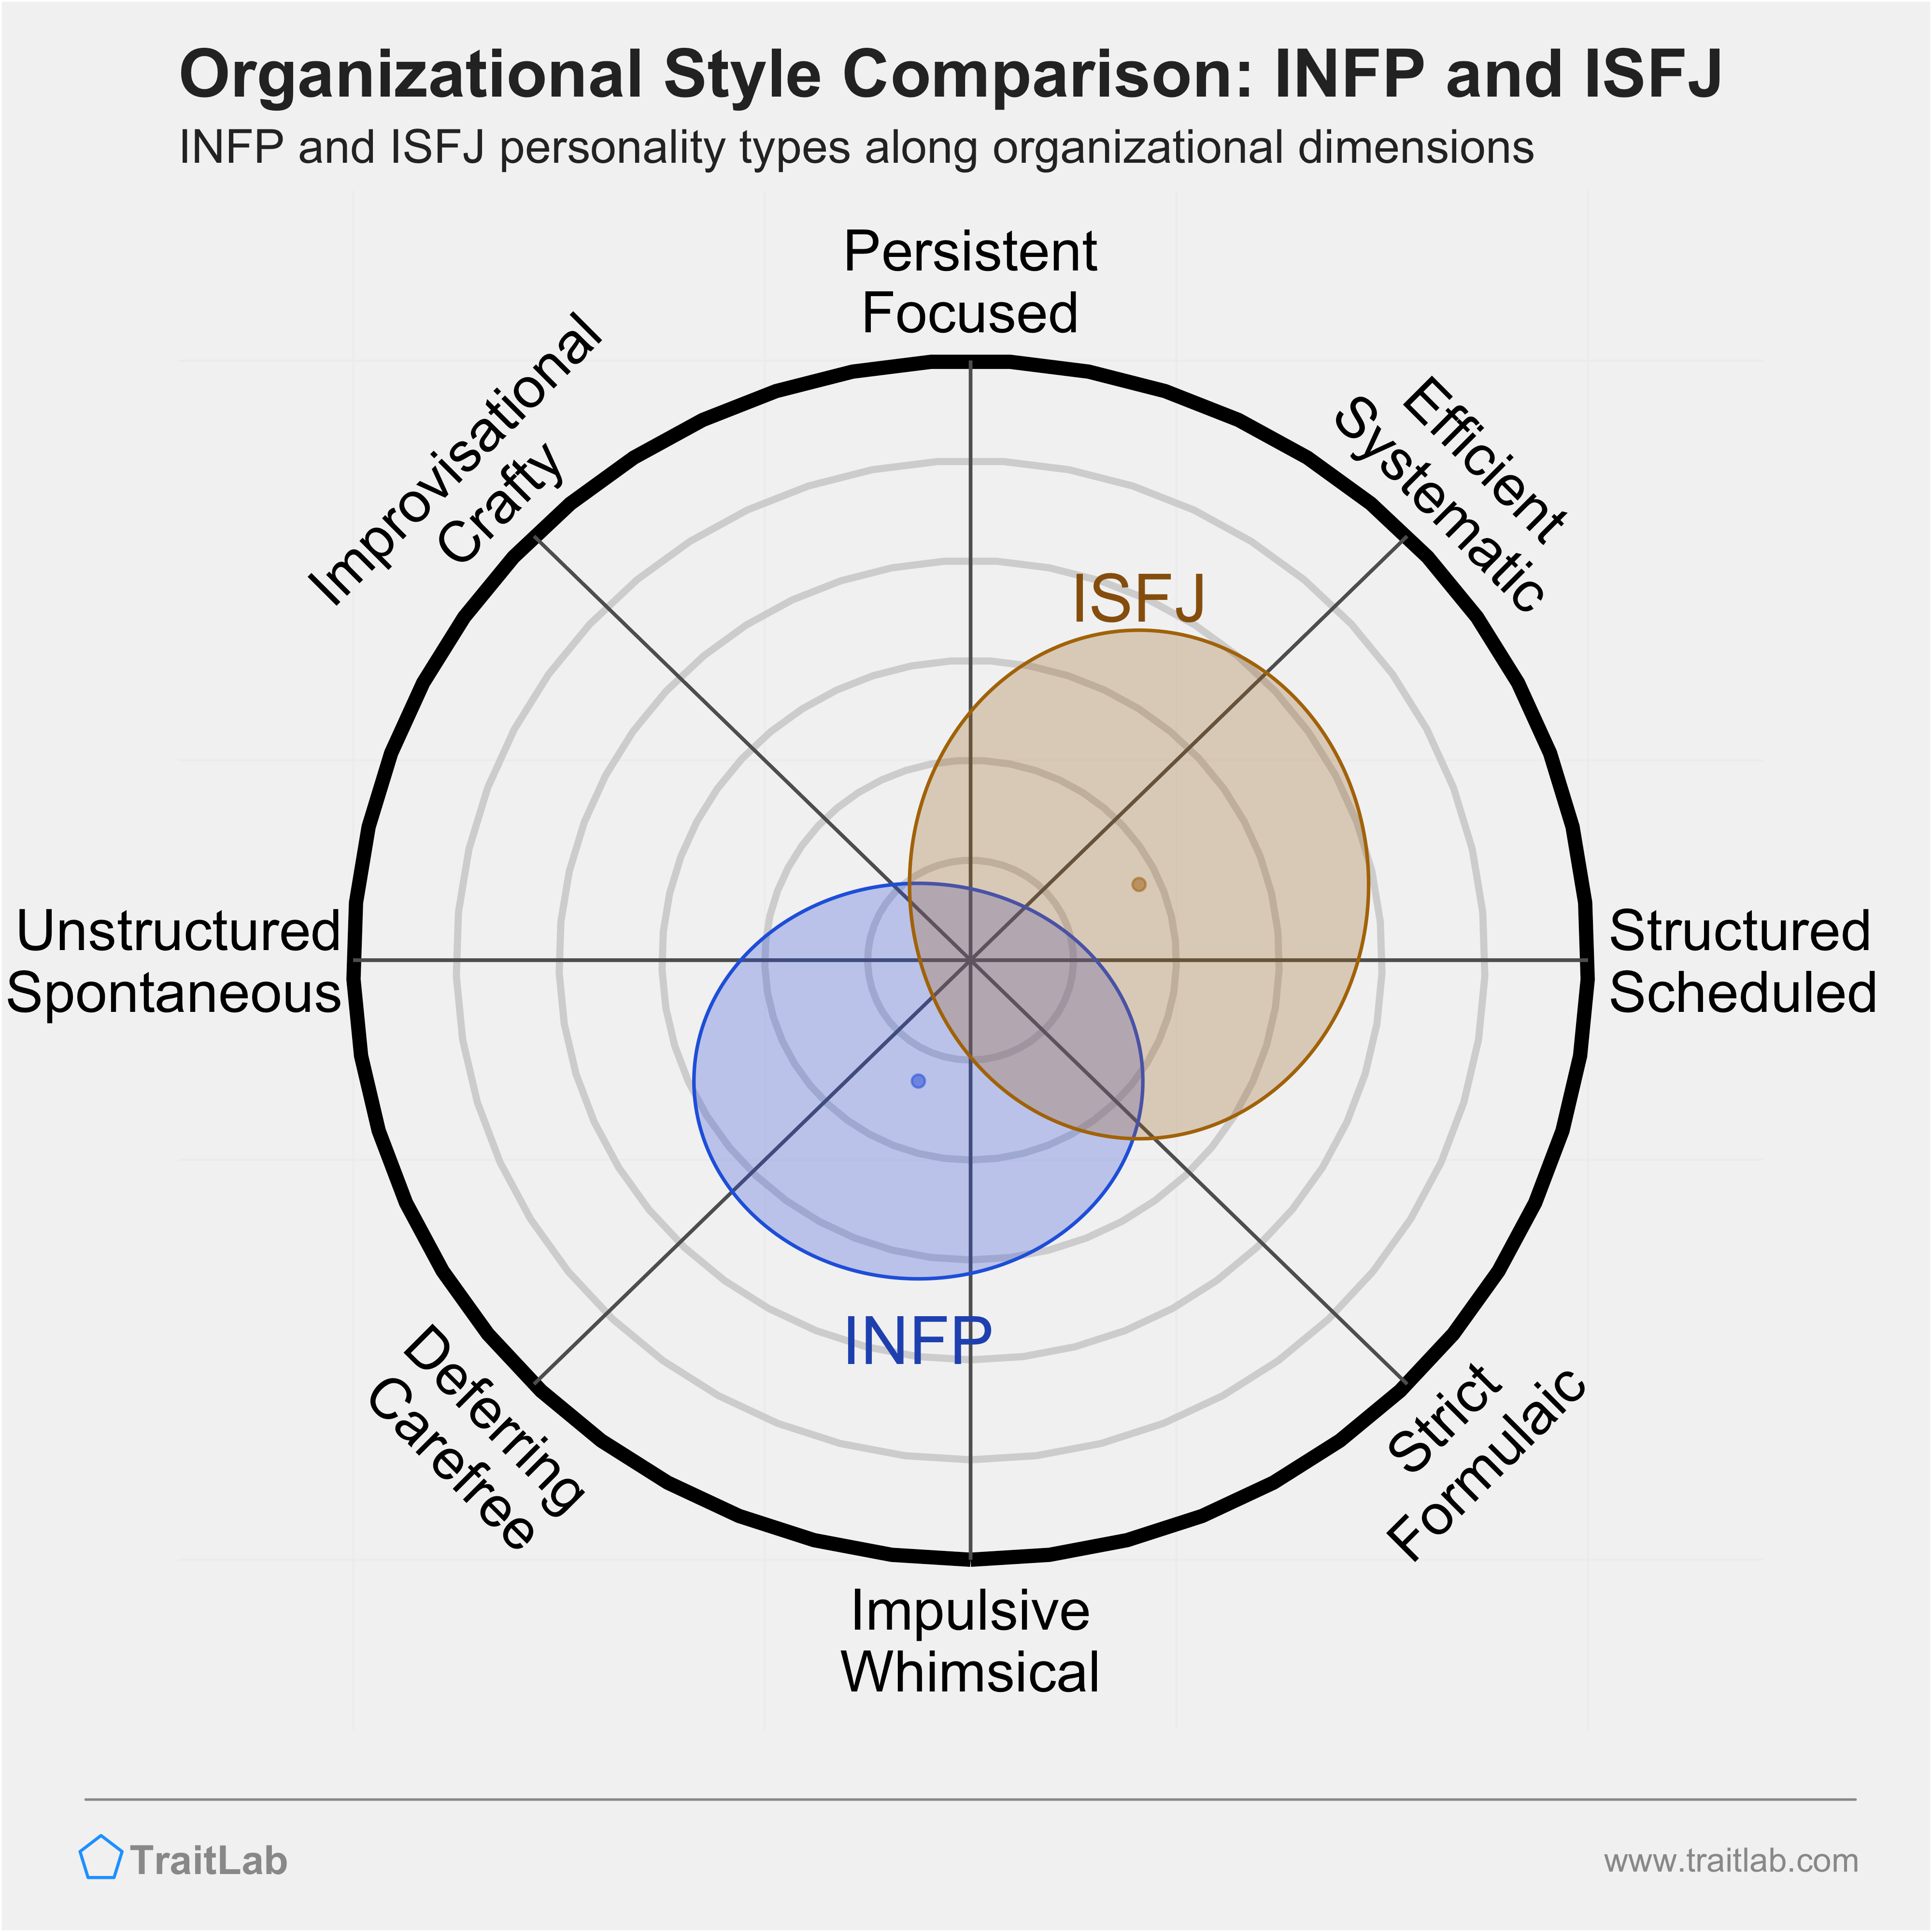 INFP and ISFJ comparison across organizational dimensions